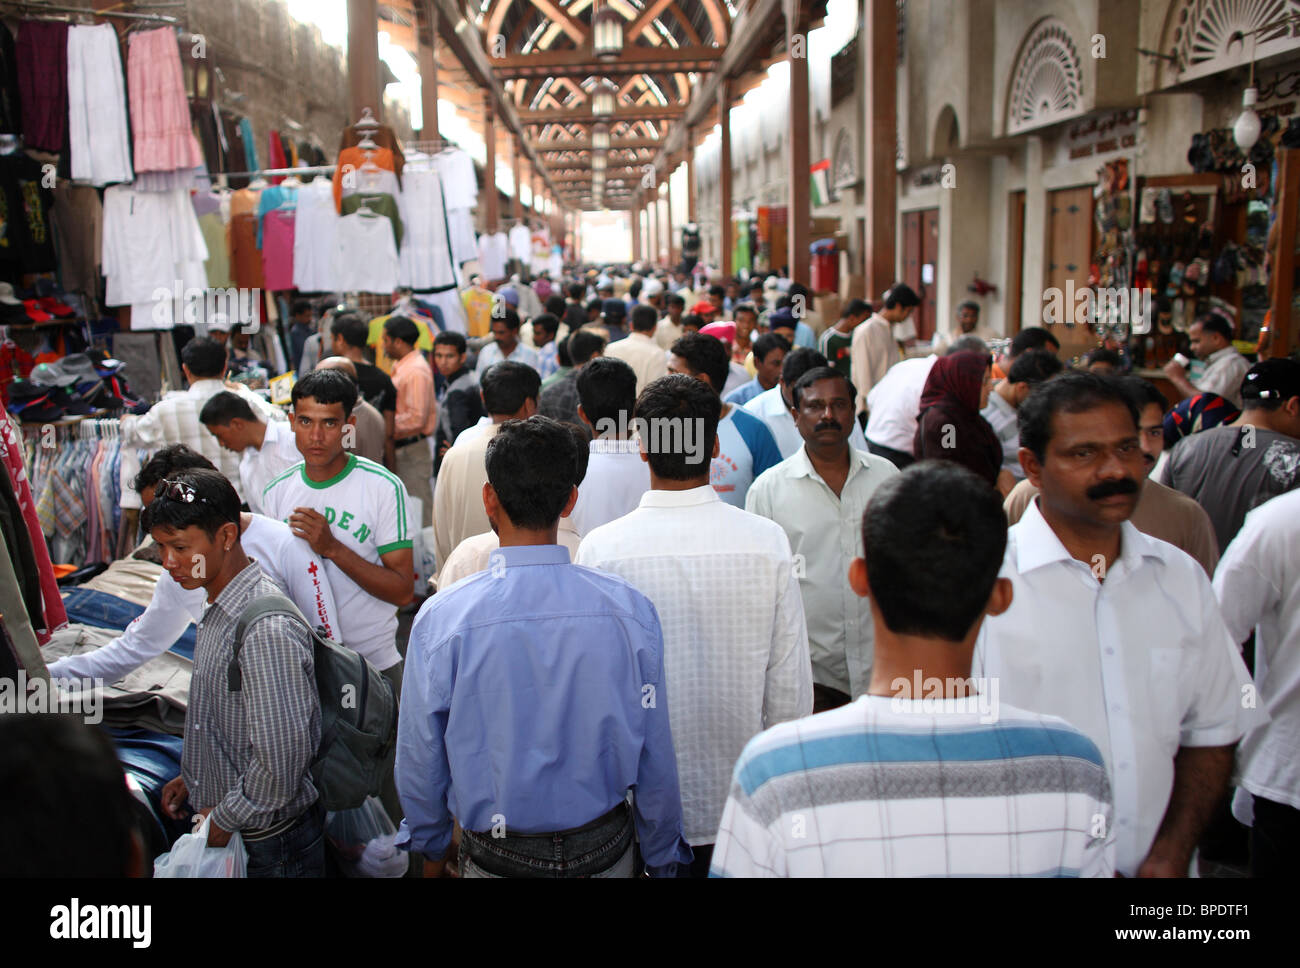 People in a souq in the old town, Dubai, United Arab Emirates Stock Photo